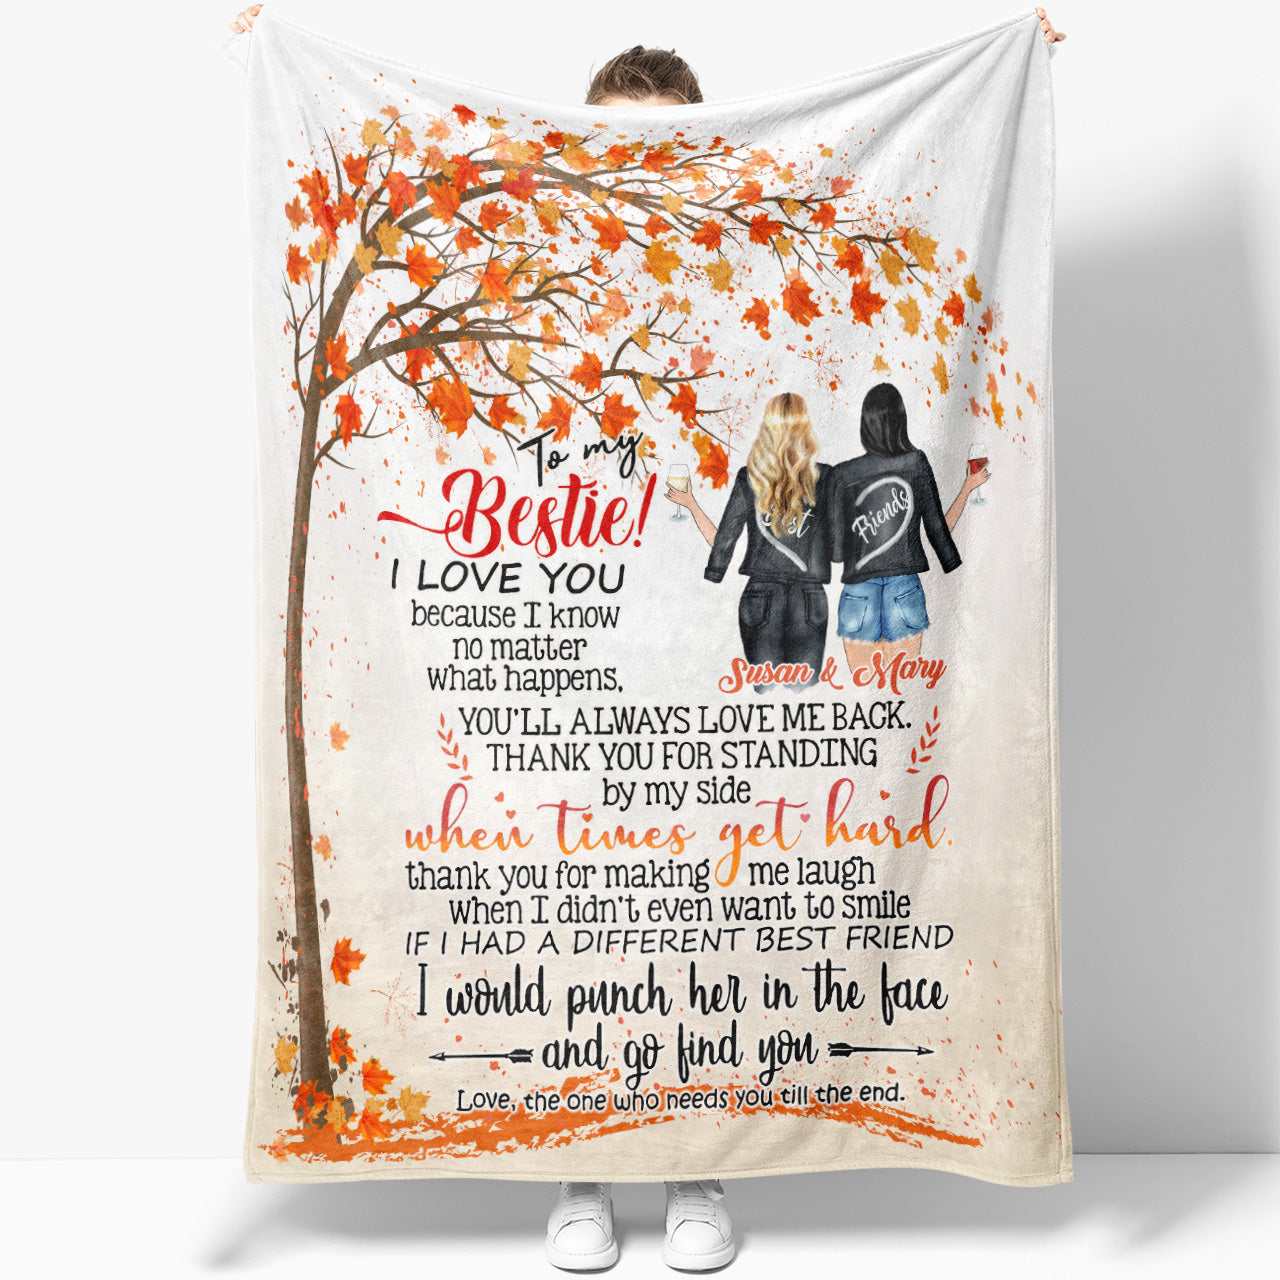 Best Friend Personalized Gift Ideas Blanket, You'll Always Love Me Blanket for Bff